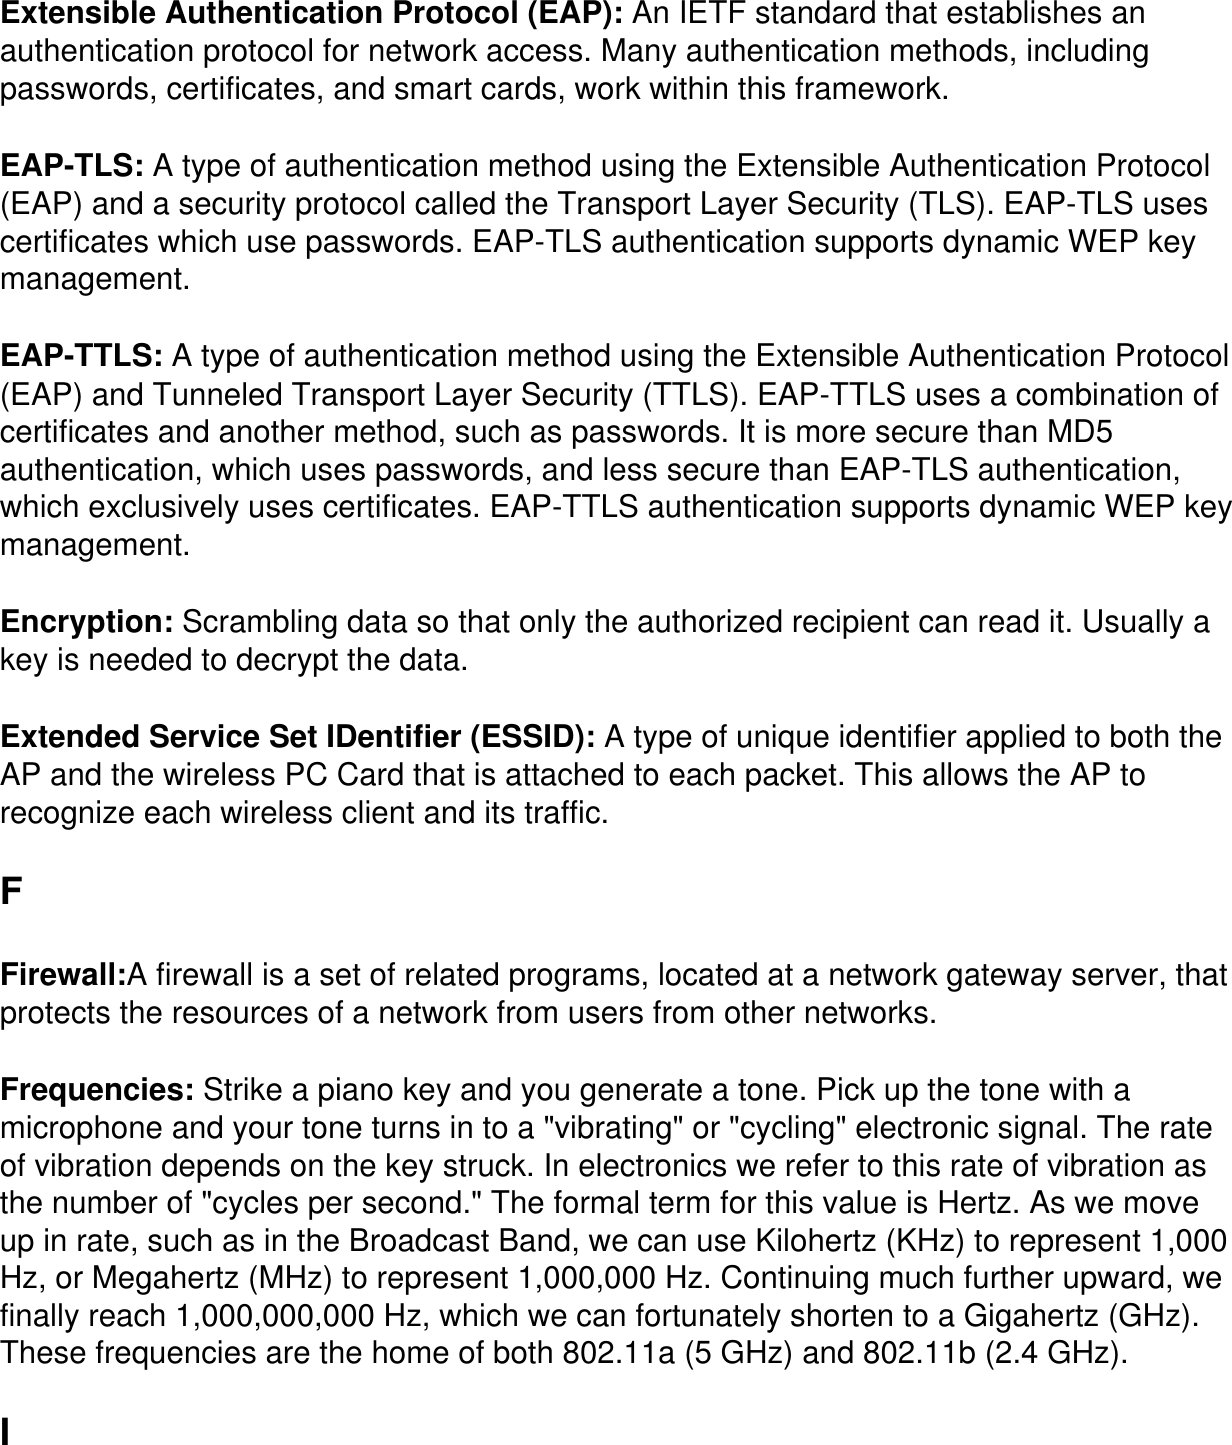 Extensible Authentication Protocol (EAP): An IETF standard that establishes an authentication protocol for network access. Many authentication methods, including passwords, certificates, and smart cards, work within this framework.EAP-TLS: A type of authentication method using the Extensible Authentication Protocol (EAP) and a security protocol called the Transport Layer Security (TLS). EAP-TLS uses certificates which use passwords. EAP-TLS authentication supports dynamic WEP key management.EAP-TTLS: A type of authentication method using the Extensible Authentication Protocol (EAP) and Tunneled Transport Layer Security (TTLS). EAP-TTLS uses a combination of certificates and another method, such as passwords. It is more secure than MD5 authentication, which uses passwords, and less secure than EAP-TLS authentication, which exclusively uses certificates. EAP-TTLS authentication supports dynamic WEP key management.Encryption: Scrambling data so that only the authorized recipient can read it. Usually a key is needed to decrypt the data.Extended Service Set IDentifier (ESSID): A type of unique identifier applied to both the AP and the wireless PC Card that is attached to each packet. This allows the AP to recognize each wireless client and its traffic.FFirewall:A firewall is a set of related programs, located at a network gateway server, that protects the resources of a network from users from other networks.Frequencies: Strike a piano key and you generate a tone. Pick up the tone with a microphone and your tone turns in to a &quot;vibrating&quot; or &quot;cycling&quot; electronic signal. The rate of vibration depends on the key struck. In electronics we refer to this rate of vibration as the number of &quot;cycles per second.&quot; The formal term for this value is Hertz. As we move up in rate, such as in the Broadcast Band, we can use Kilohertz (KHz) to represent 1,000 Hz, or Megahertz (MHz) to represent 1,000,000 Hz. Continuing much further upward, we finally reach 1,000,000,000 Hz, which we can fortunately shorten to a Gigahertz (GHz). These frequencies are the home of both 802.11a (5 GHz) and 802.11b (2.4 GHz).I